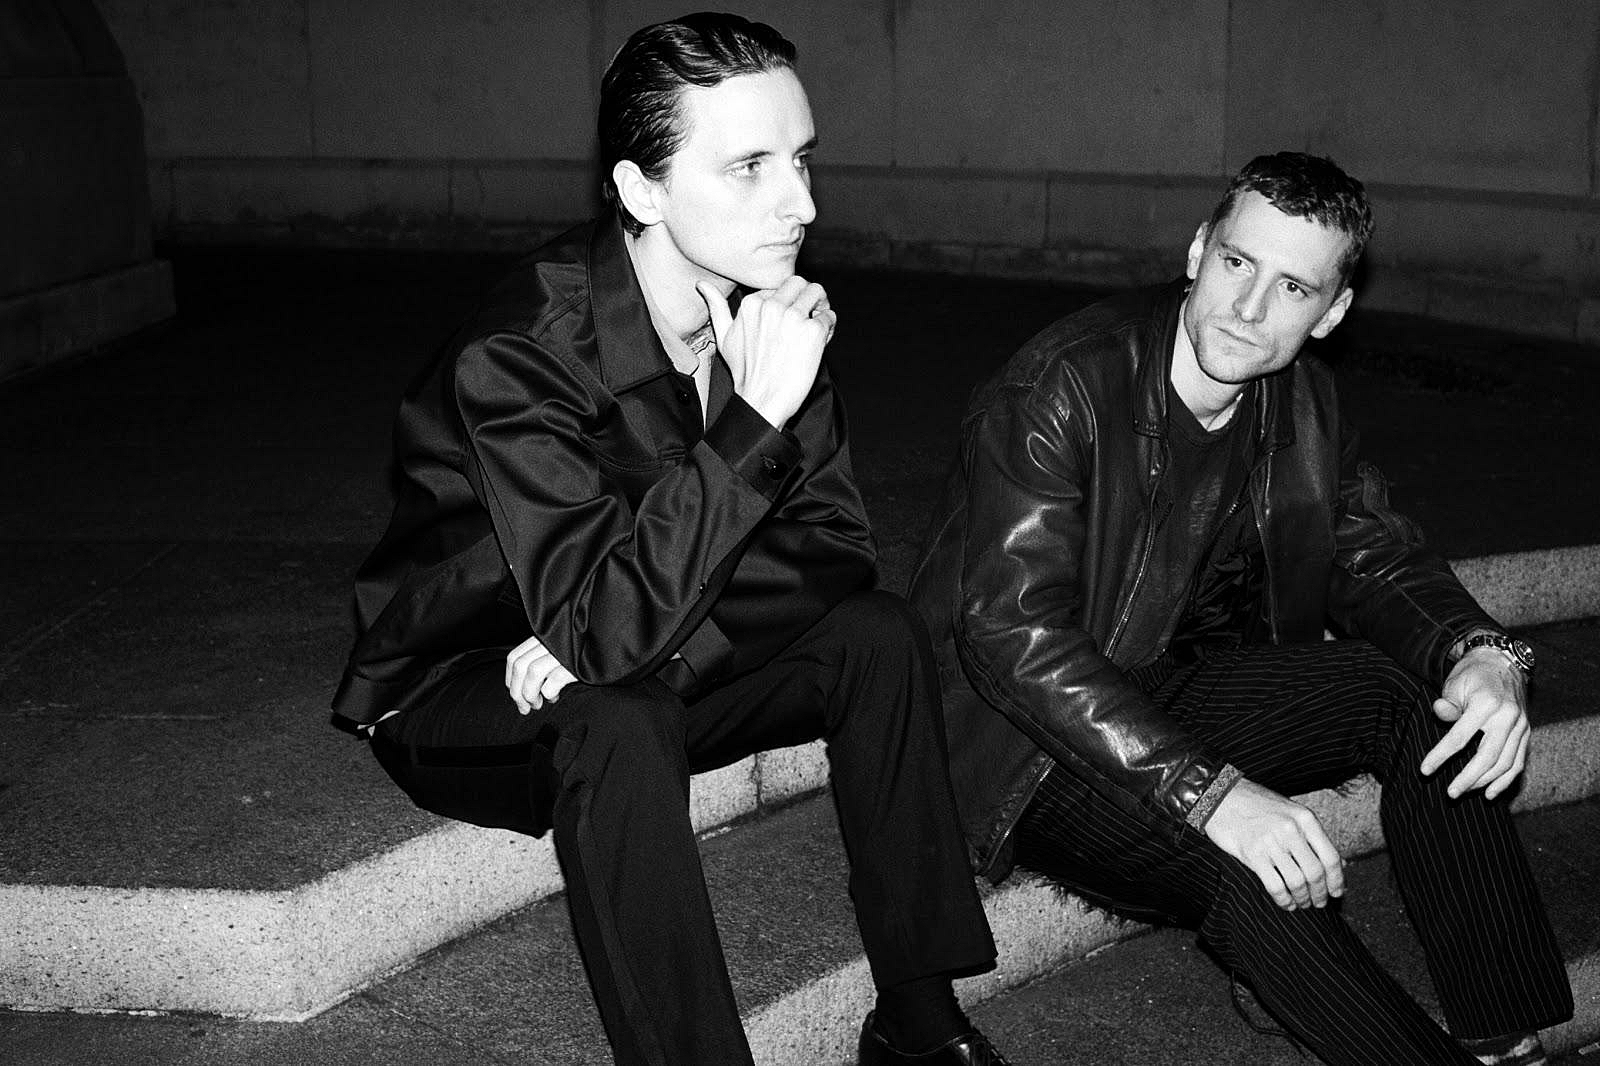 These New Puritans share 'Beyond Black Suns' video